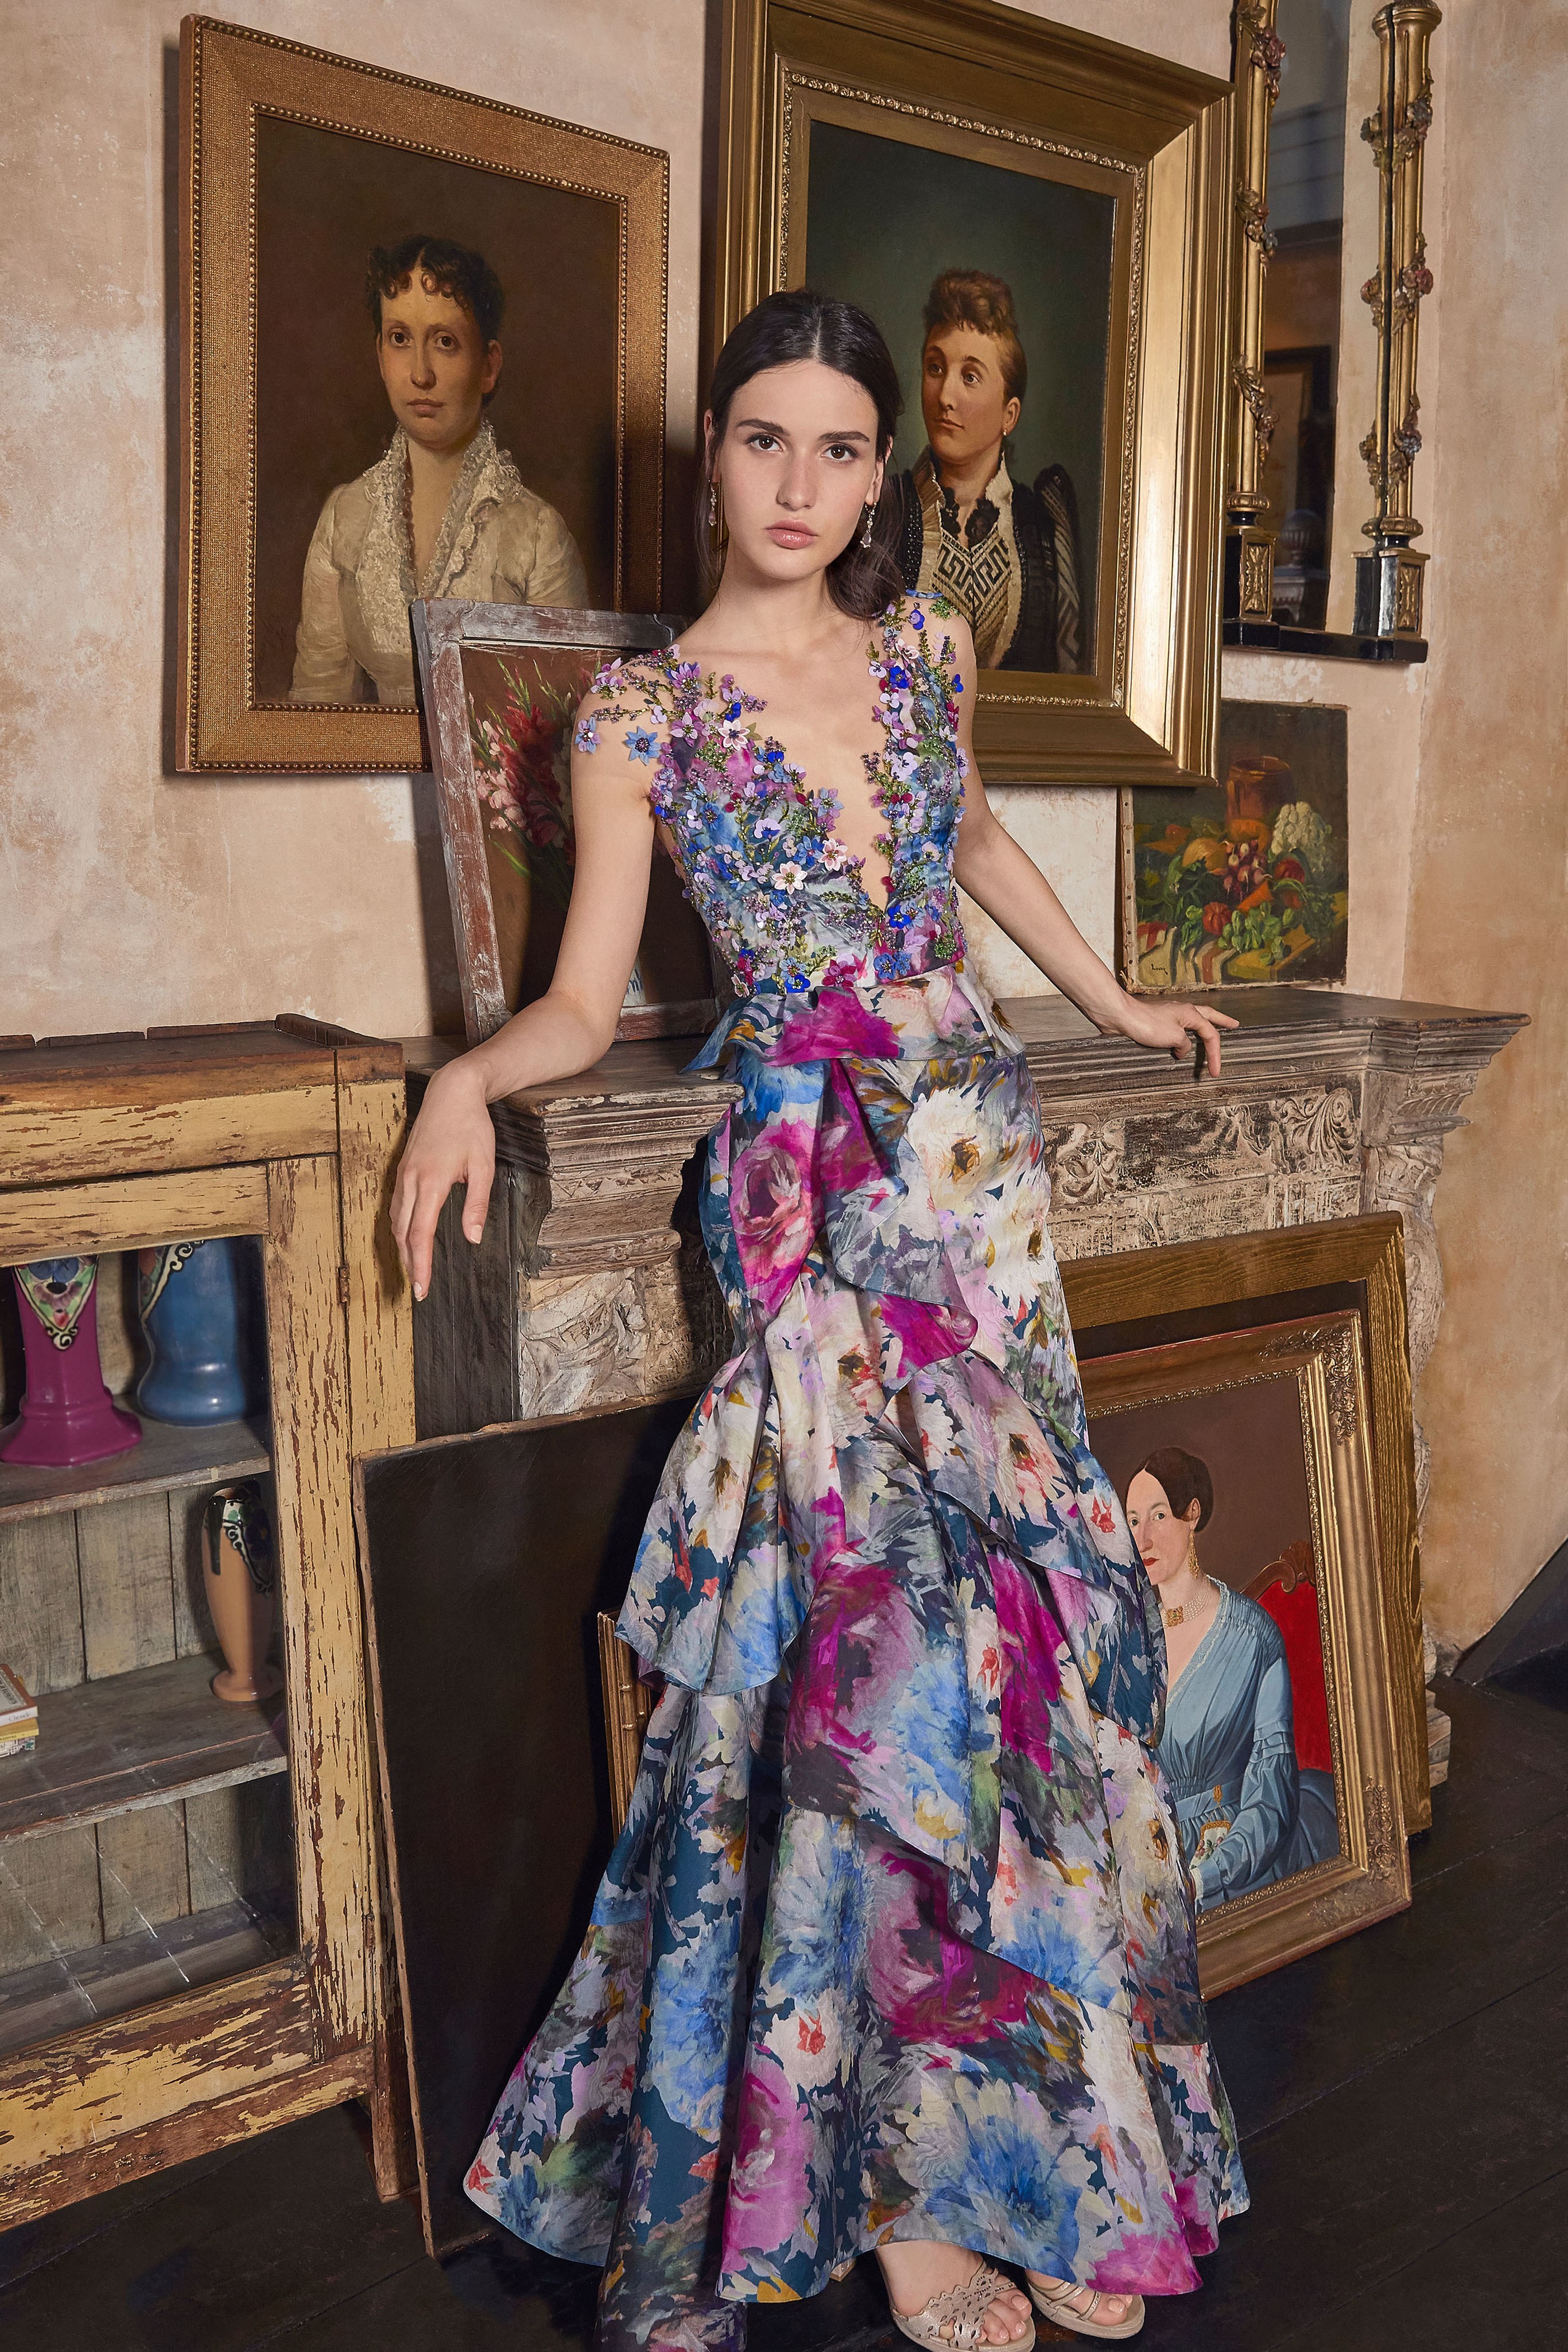 Marchesa Resort 2020 Collection Is Feminine, Floral And Fabulous!